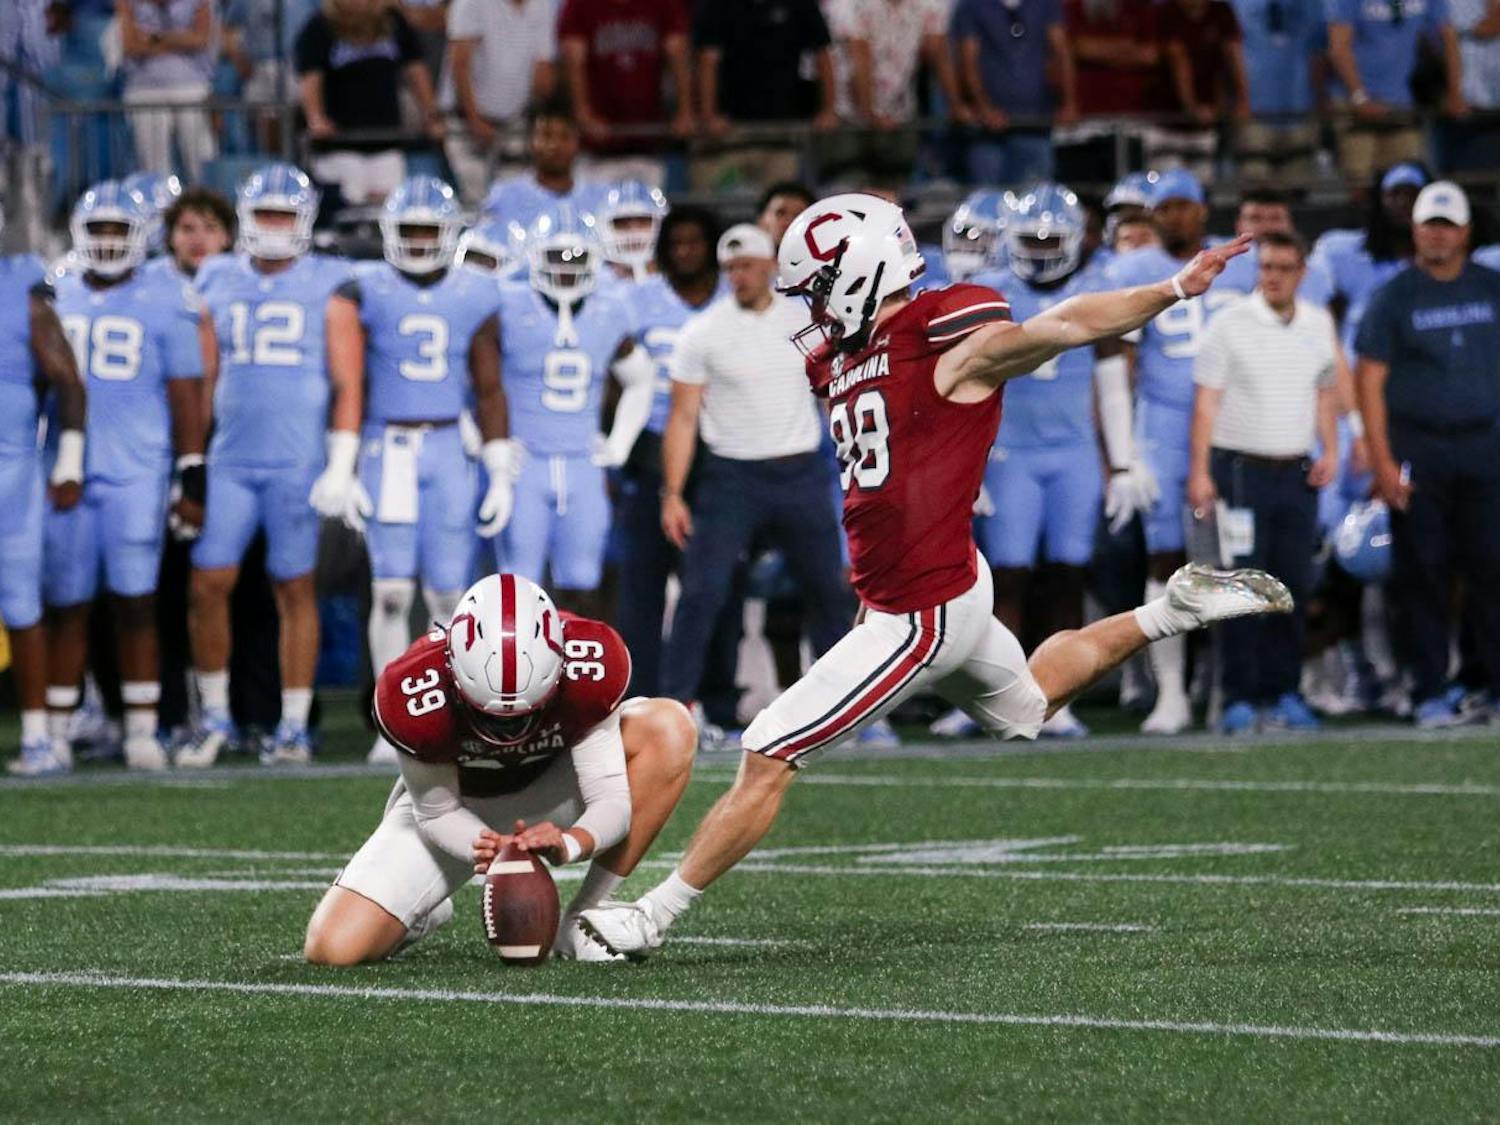 Senior placekicker Mitch Jeter scores a field goal for the Gamecocks. The University of North Carolina defeated the University of South Carolina 31-17 on Sept. 2, 2023.